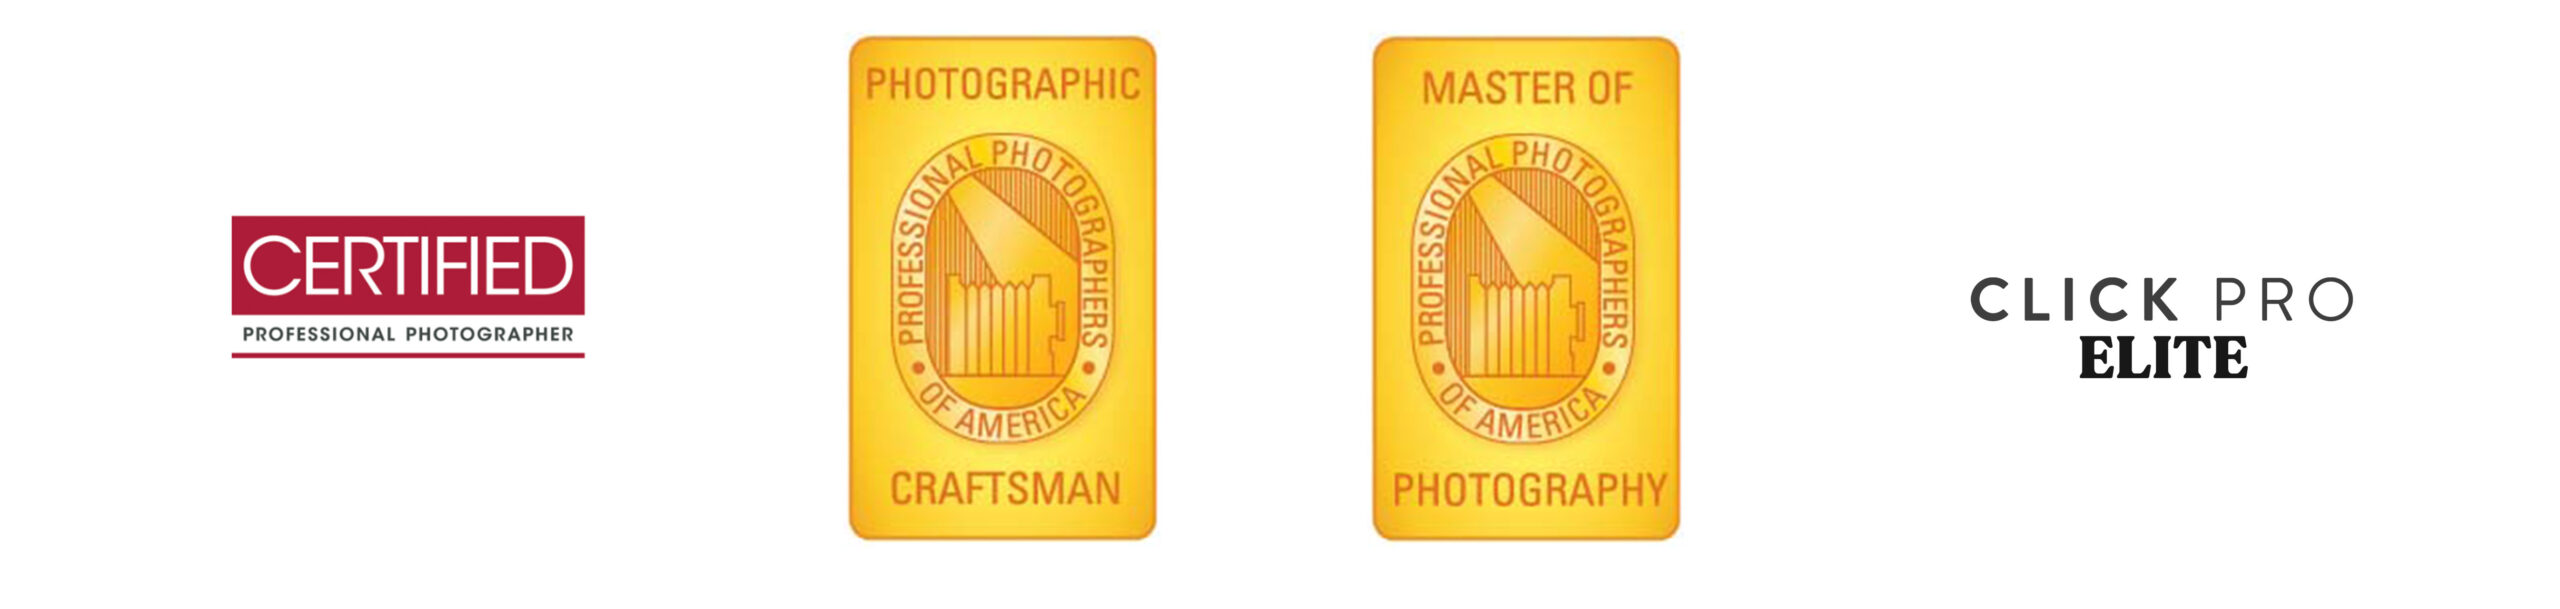 Professional Photographers of America, Master of Photography, Photographic Craftsman, Certified Professional Photographer, Click Pro Elite